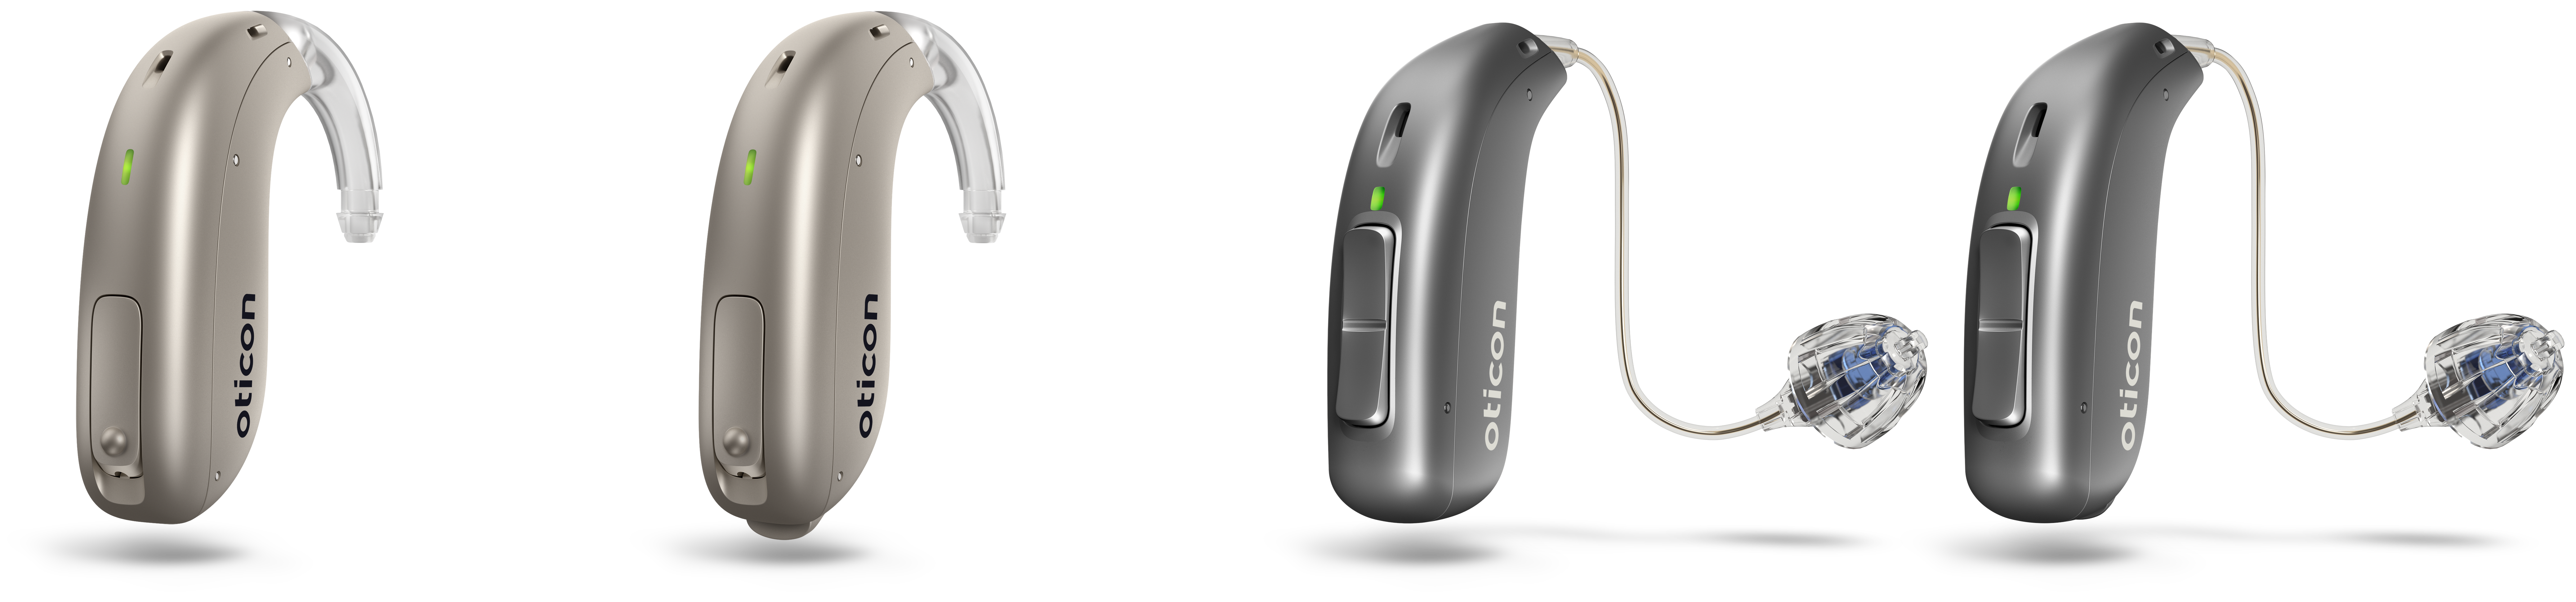 Oticon More Models Hearing Aids